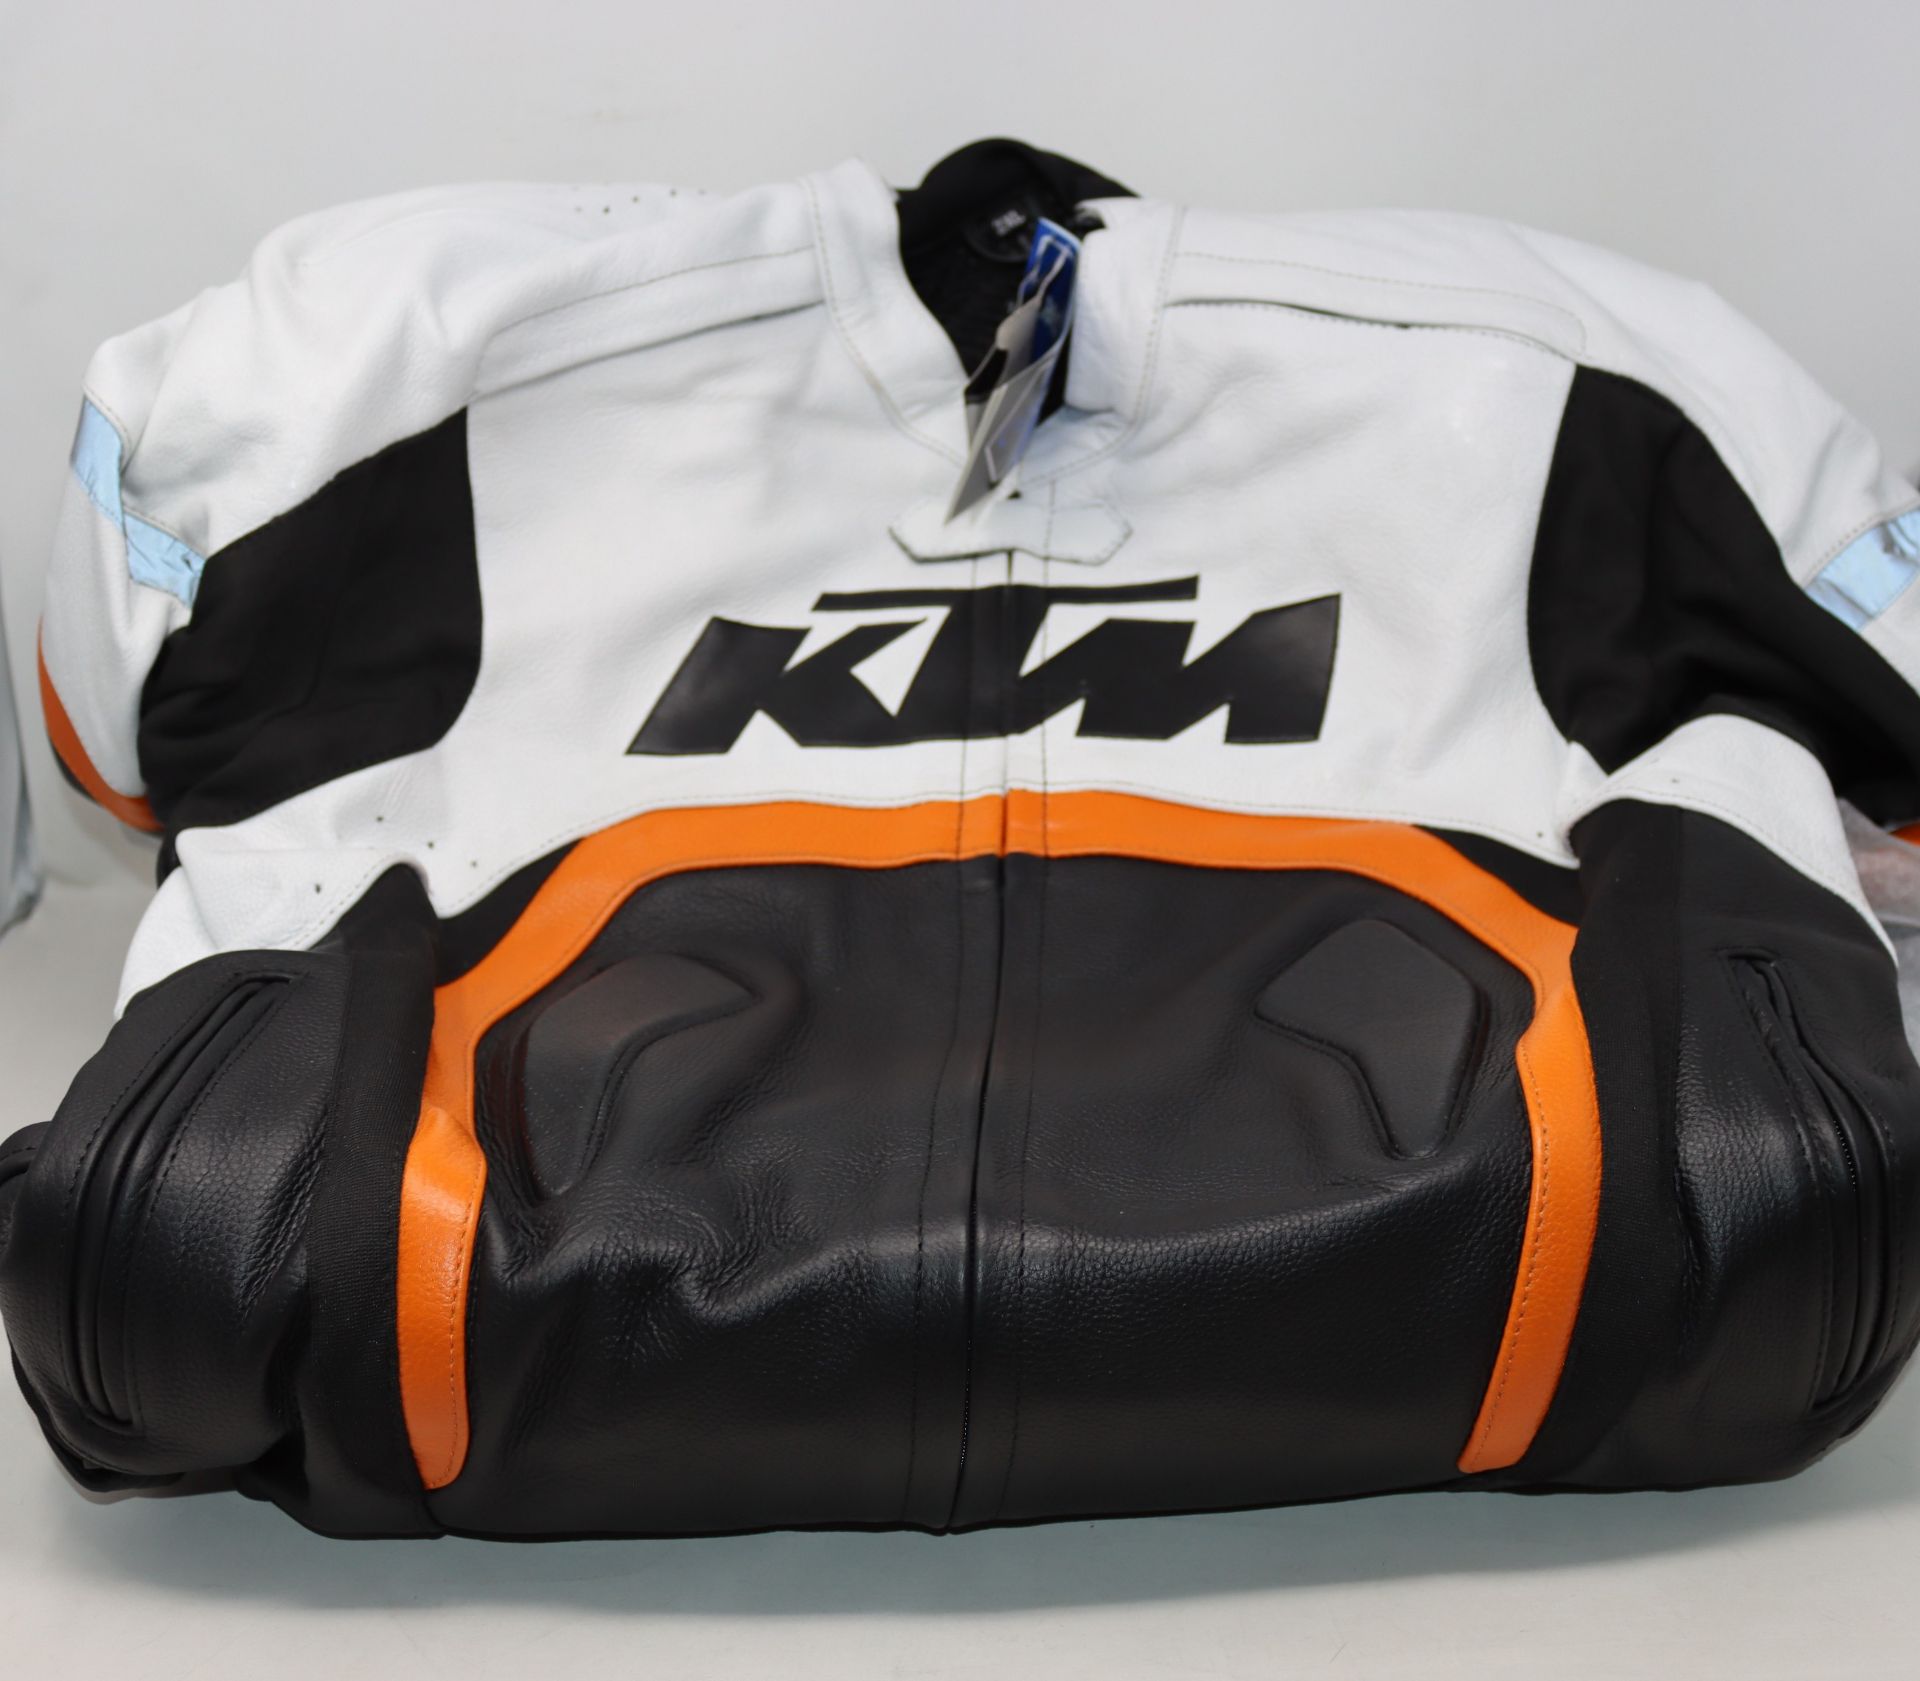 An as new KTM Protector leather motorcycle suit in black and white with orange trim (2XL).